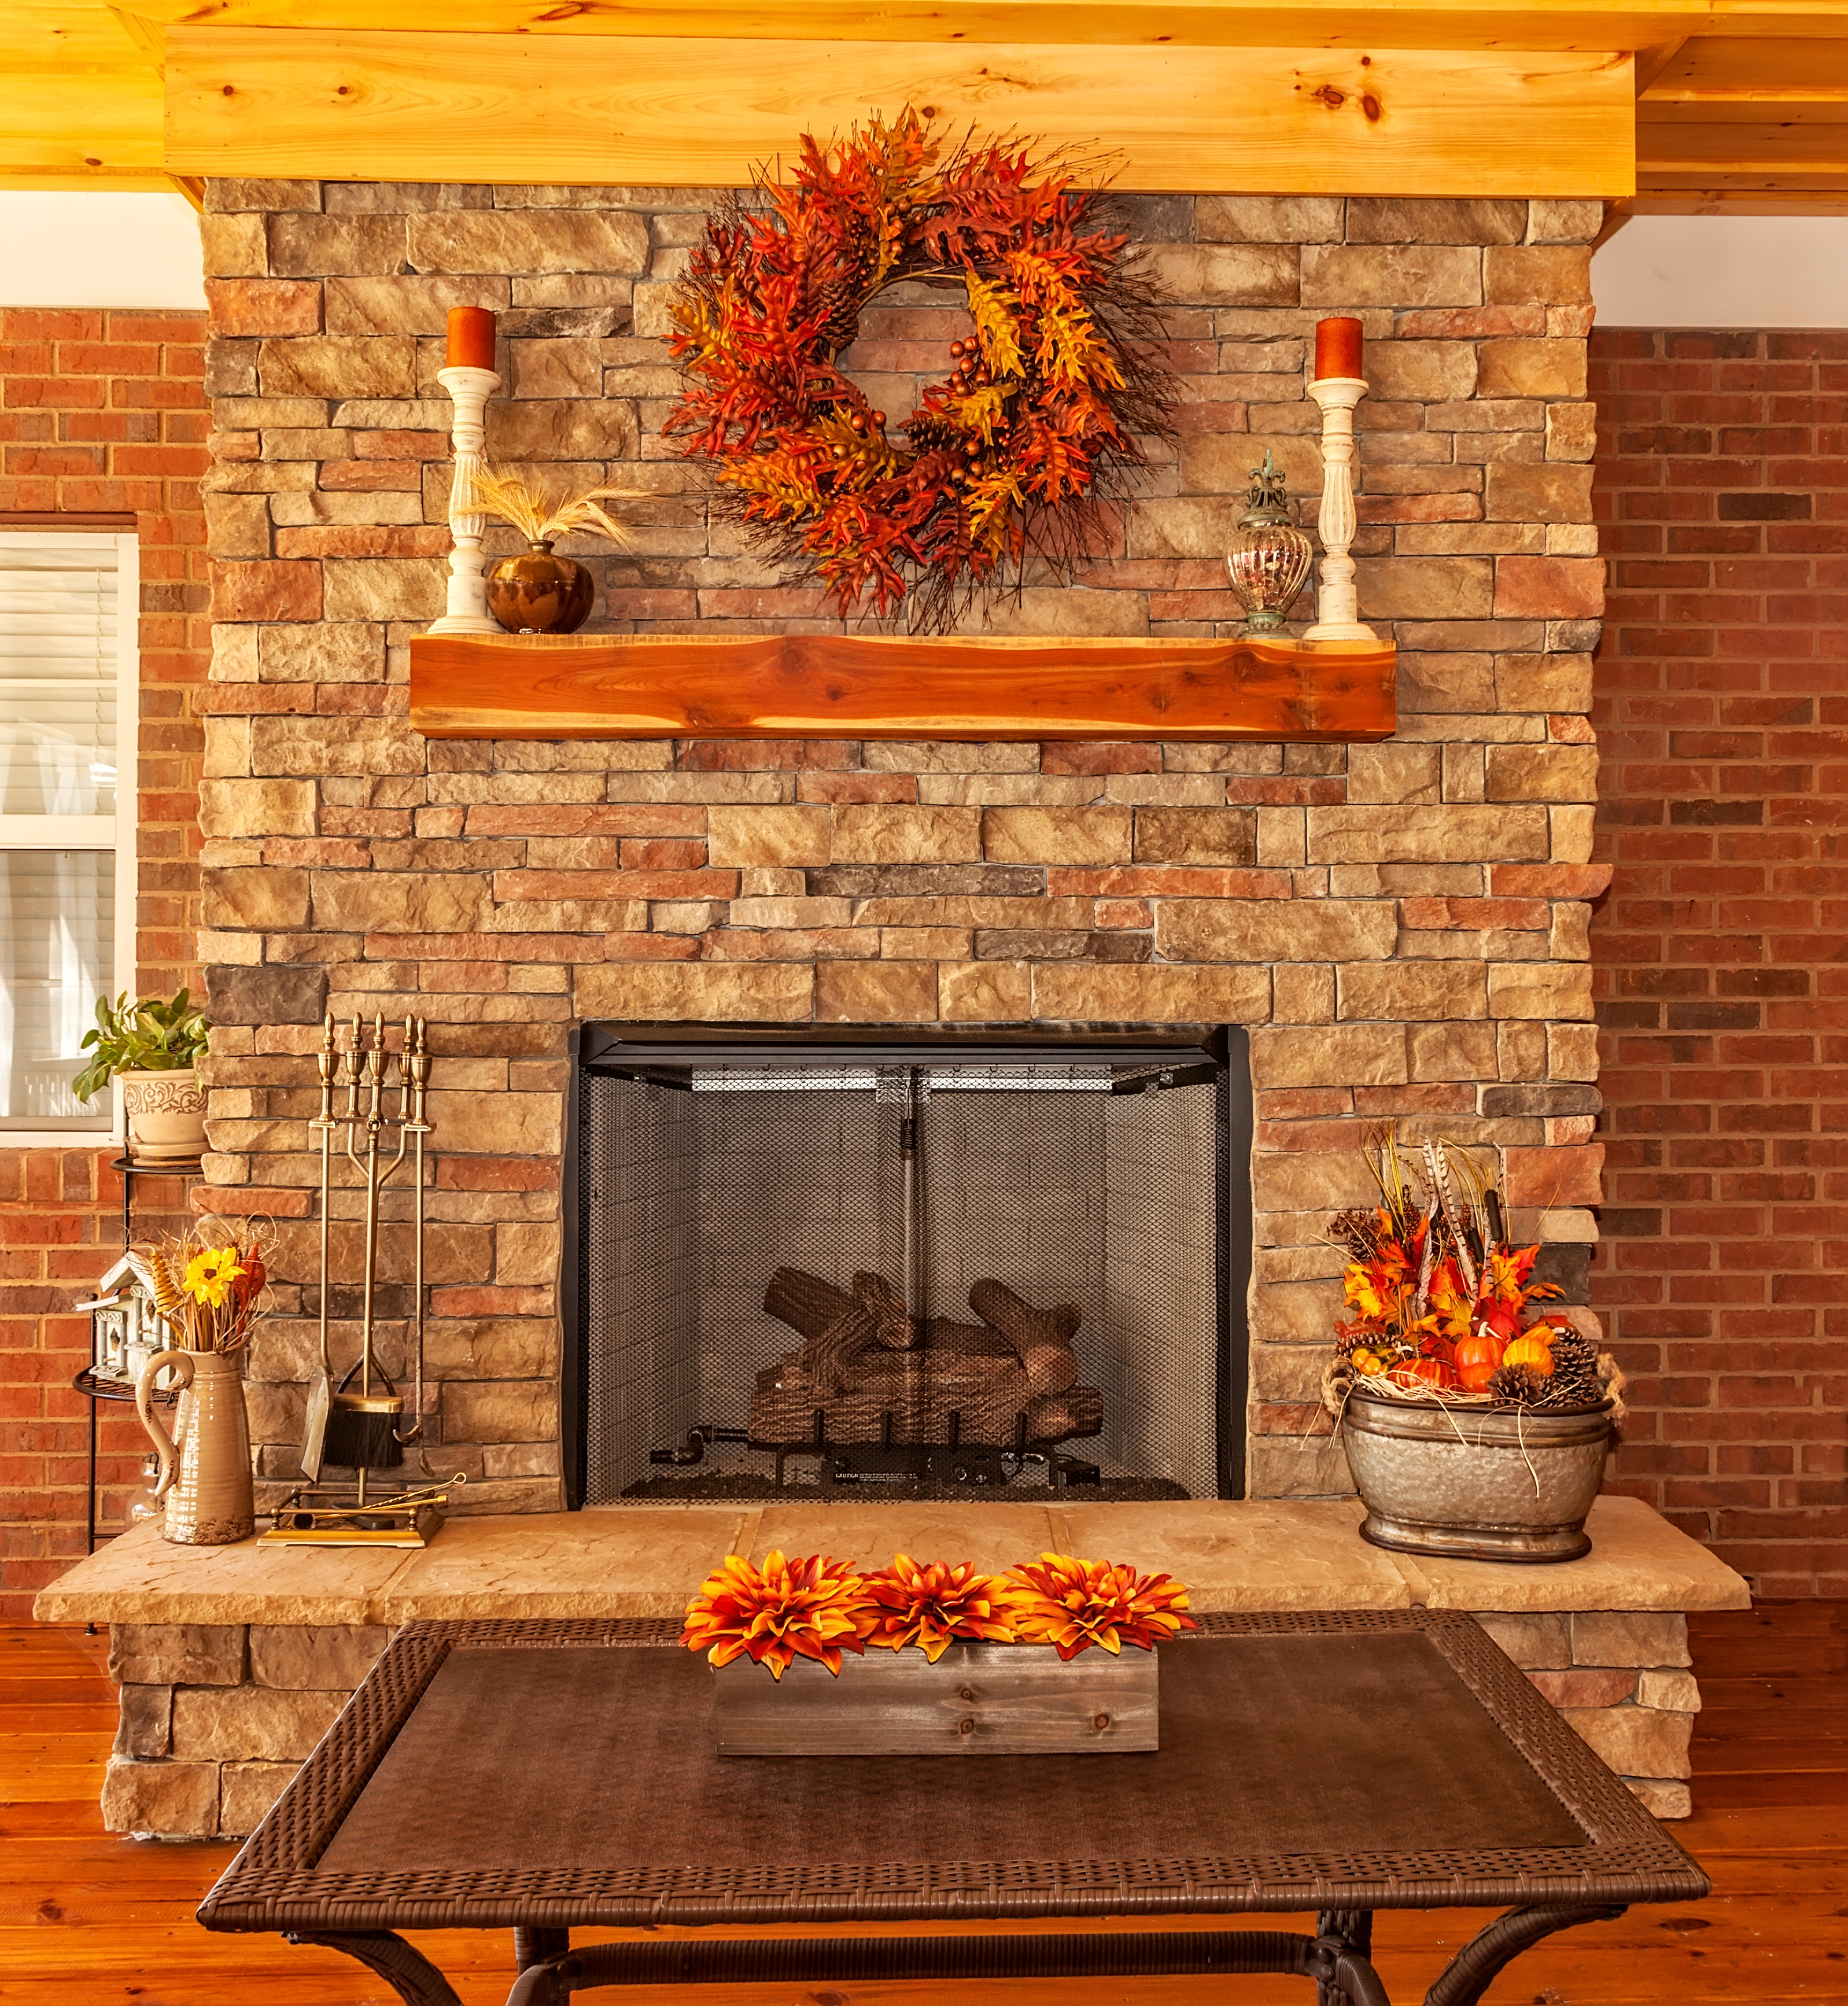 5 Fall Mantel Decorating Ideas That'll Make You Look Like a Pro 3